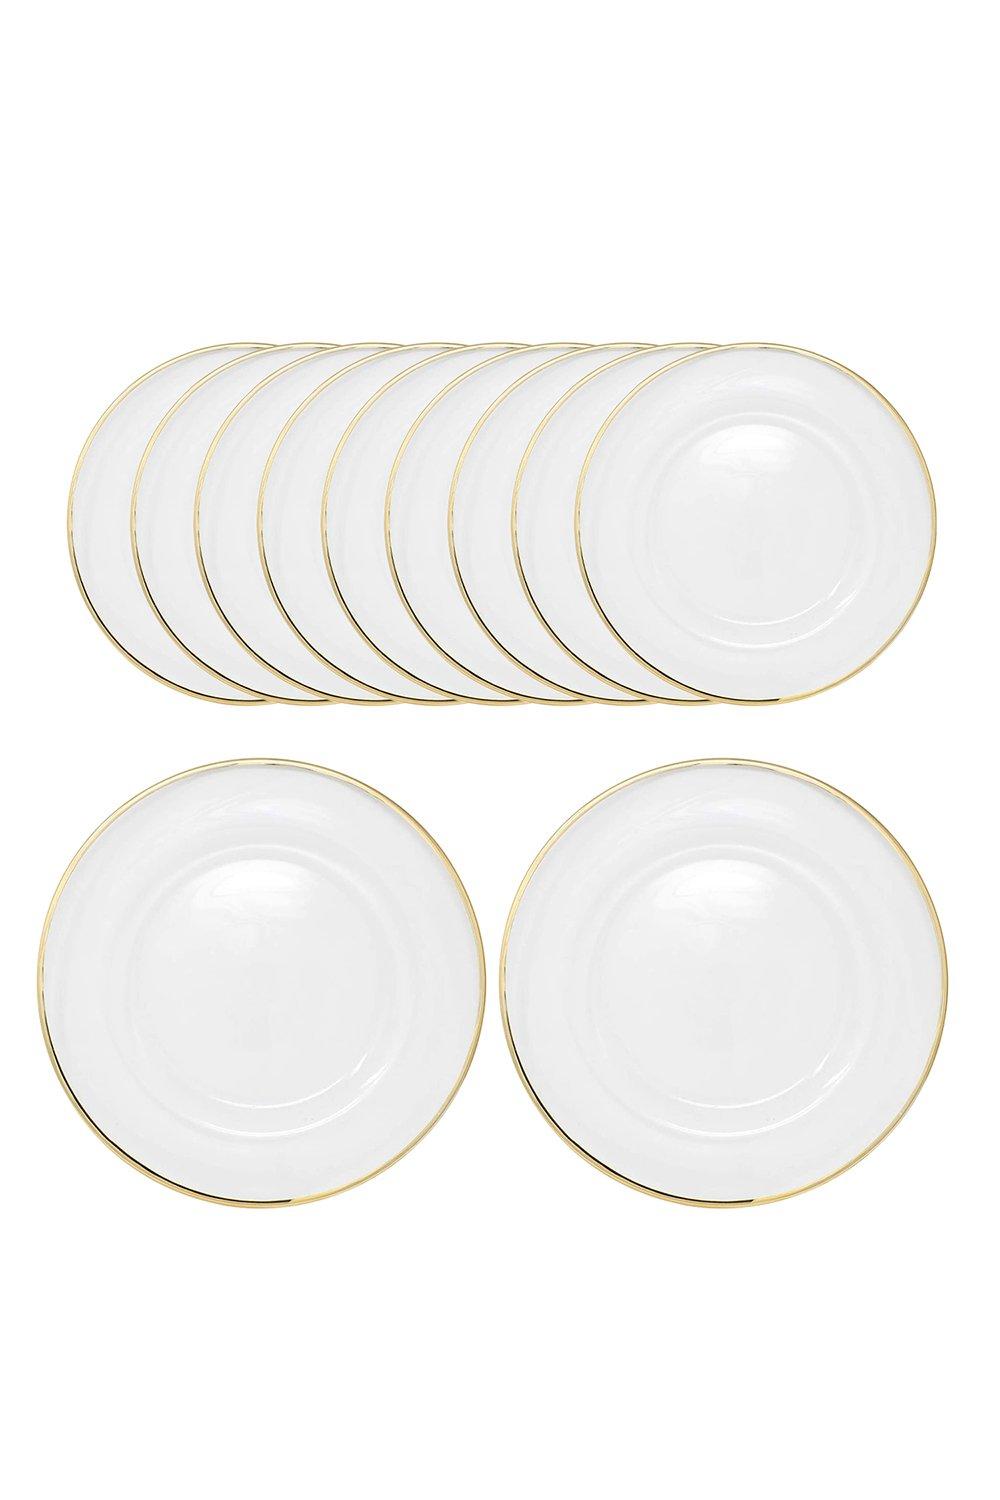 Charger Plates for Table Decoration - Pack of 12